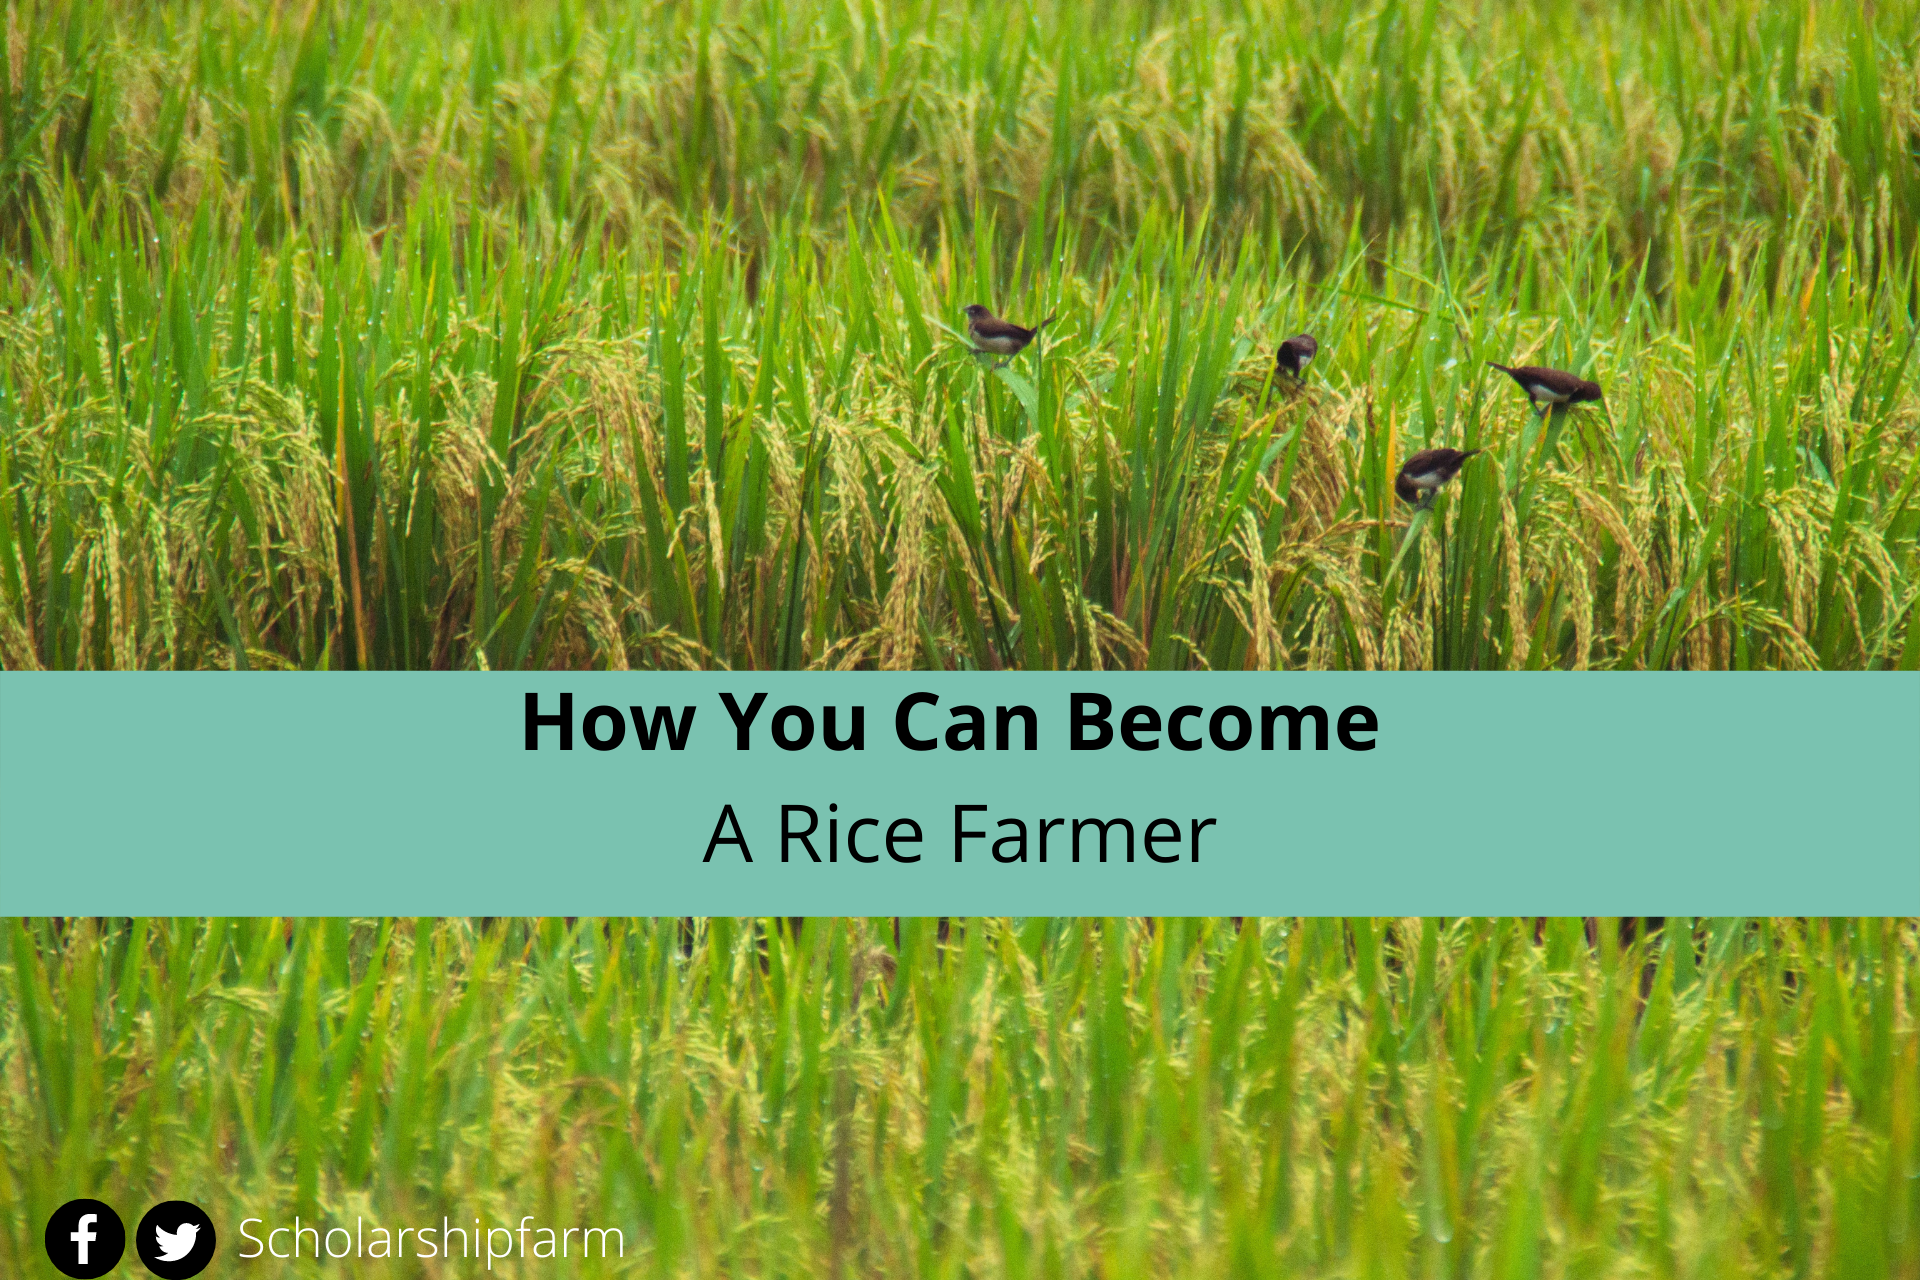 How You Can Become A Rice Farmer